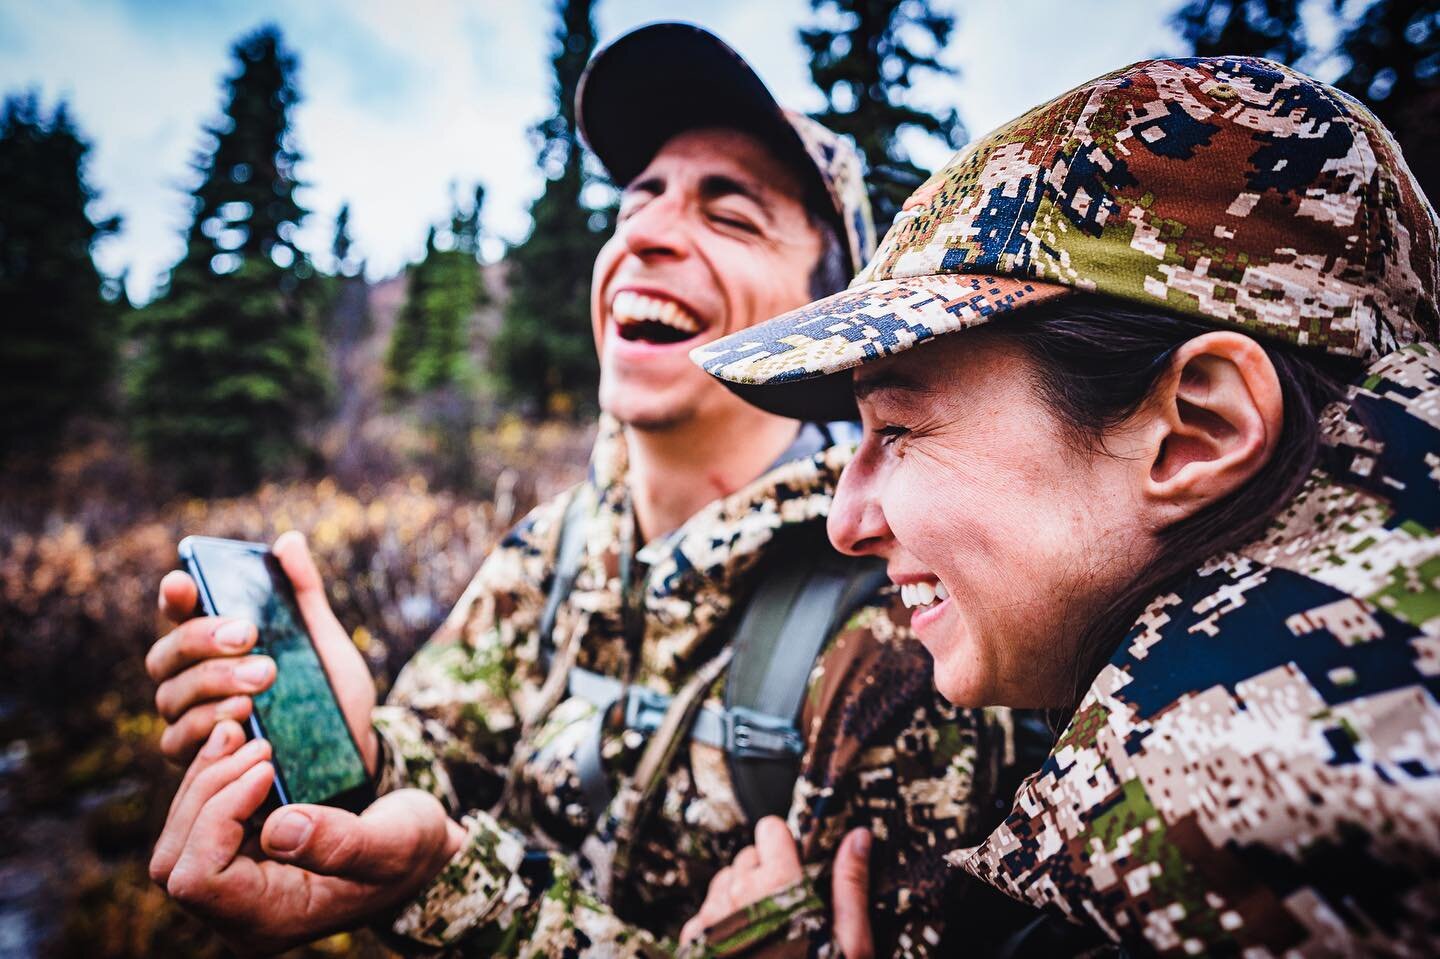 The 80/20 rule &mdash; Find someone who laughs at 80% of your jokes when less than 20% are funny. Got lucky with @mtbound and she&rsquo;s still laughing (at me).

📸 @outsideandseek